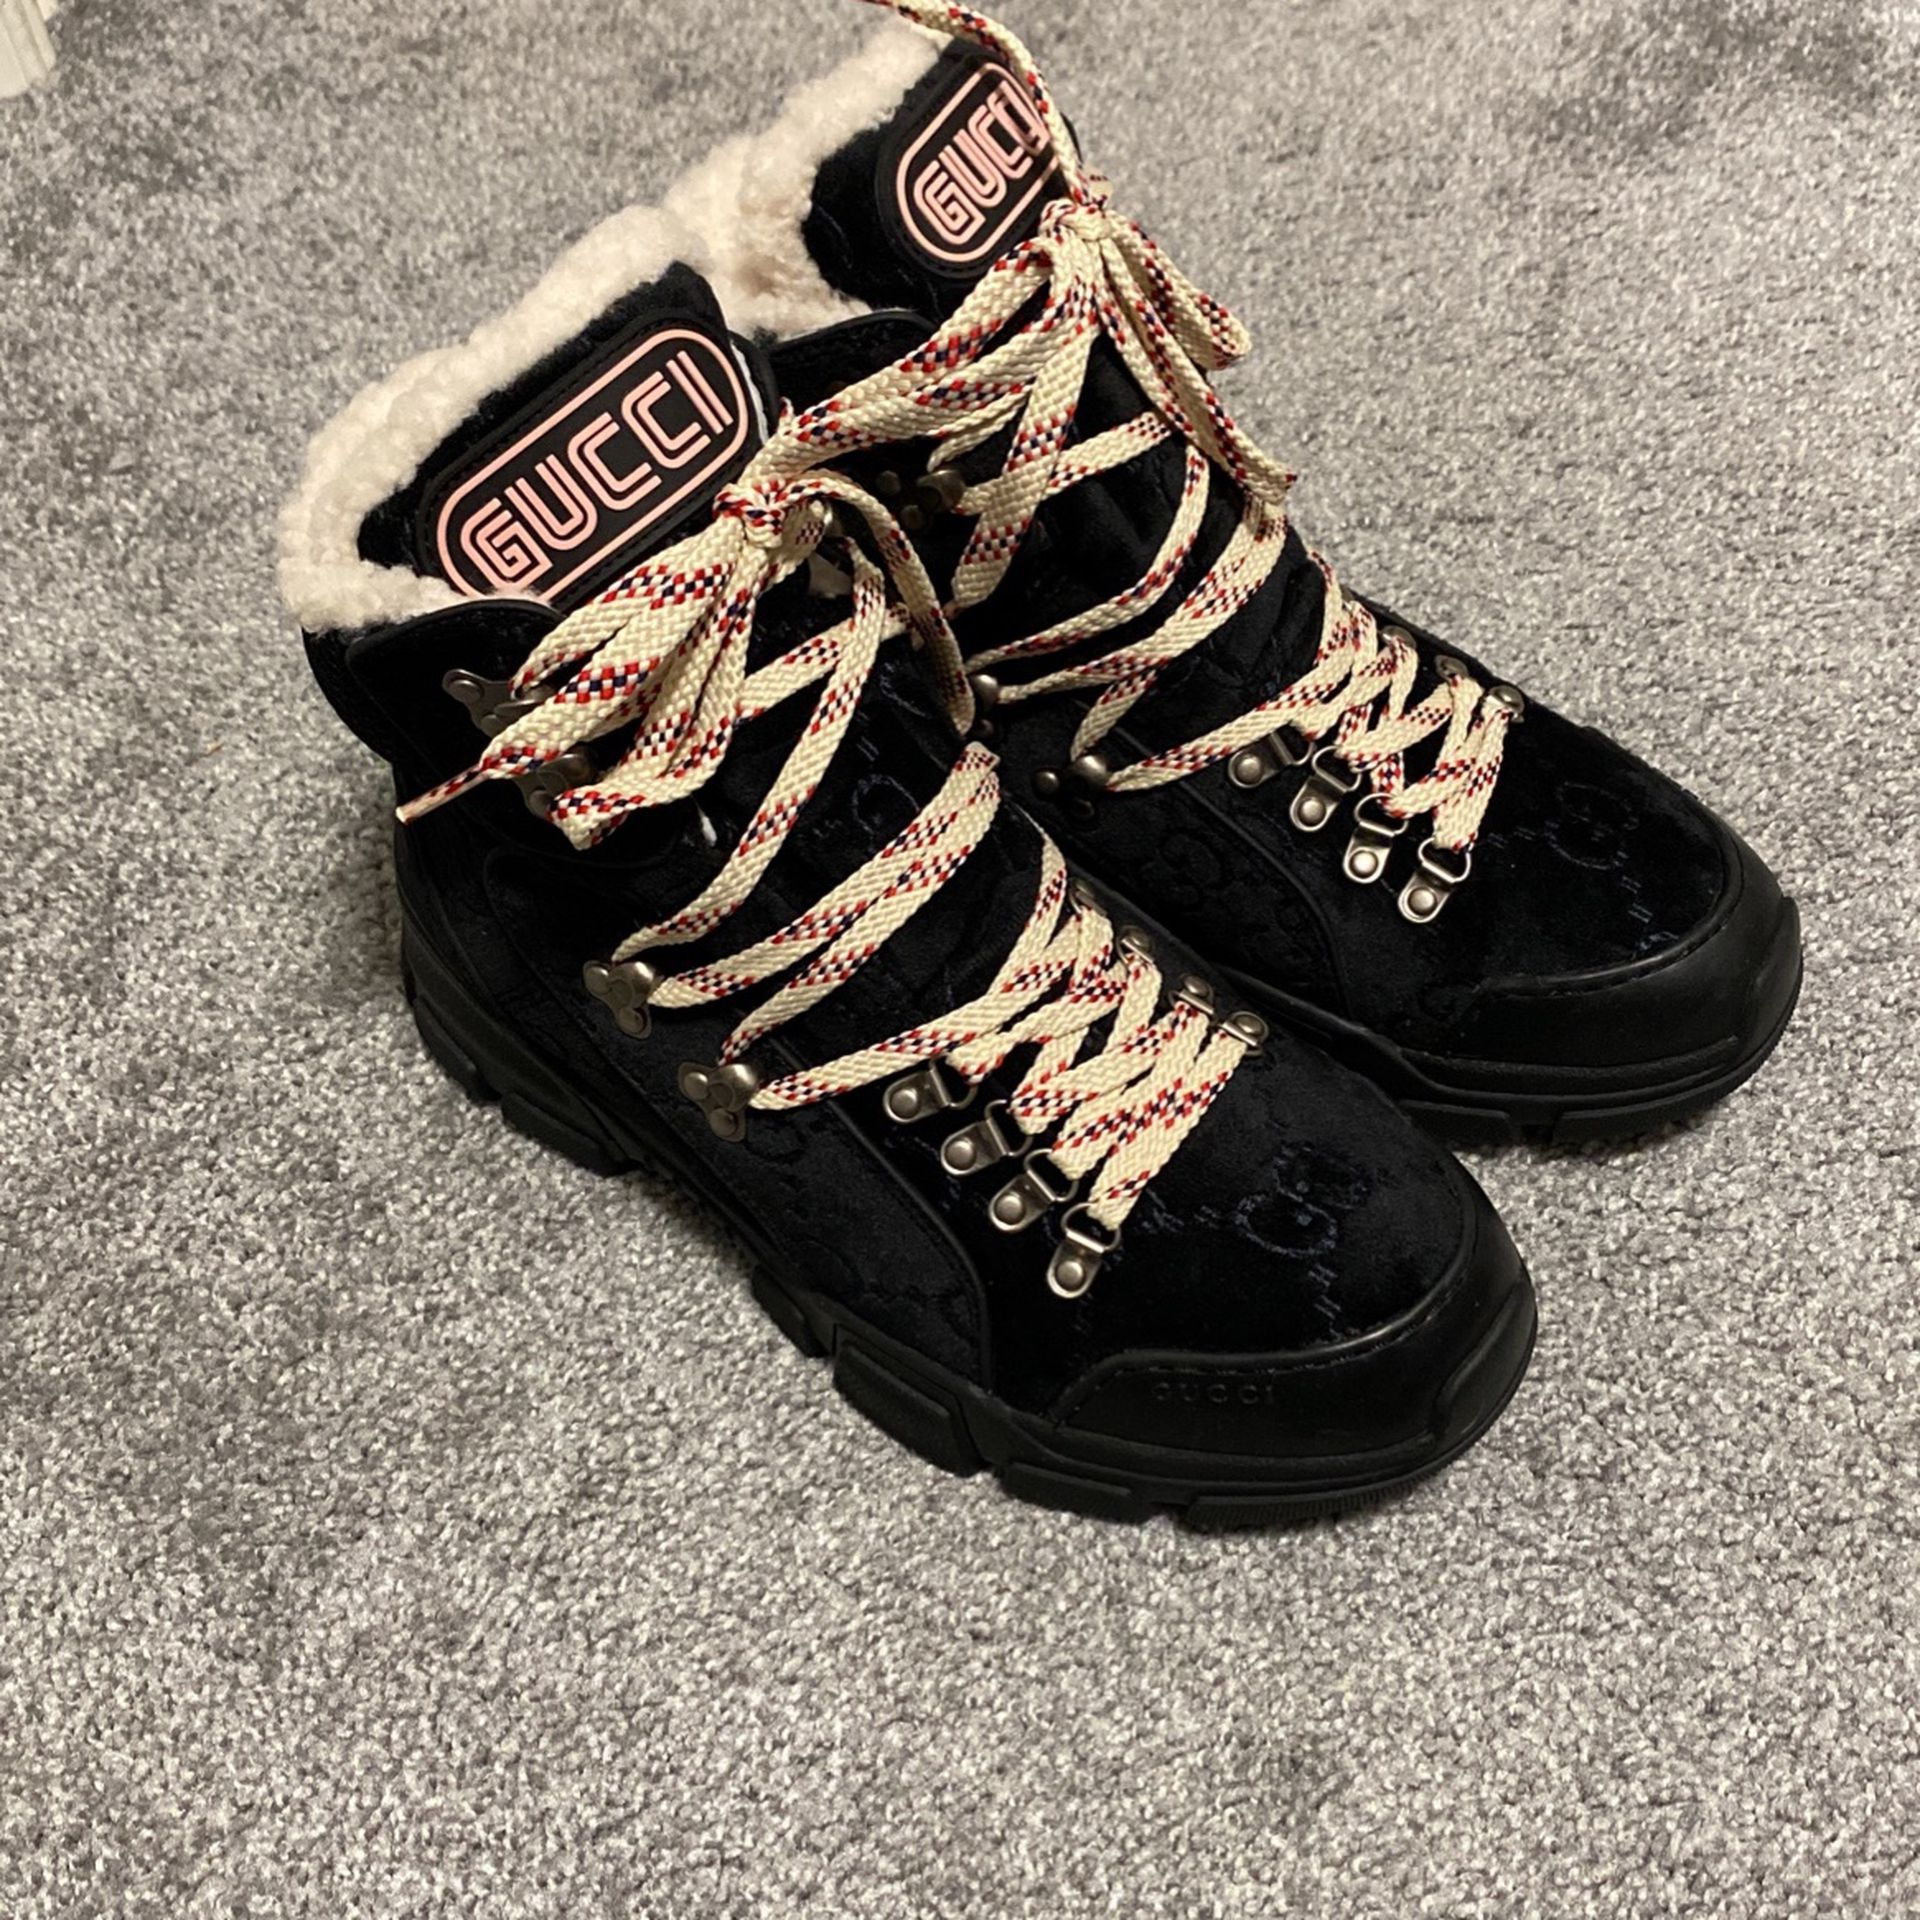 Gucci Boots Women’s New